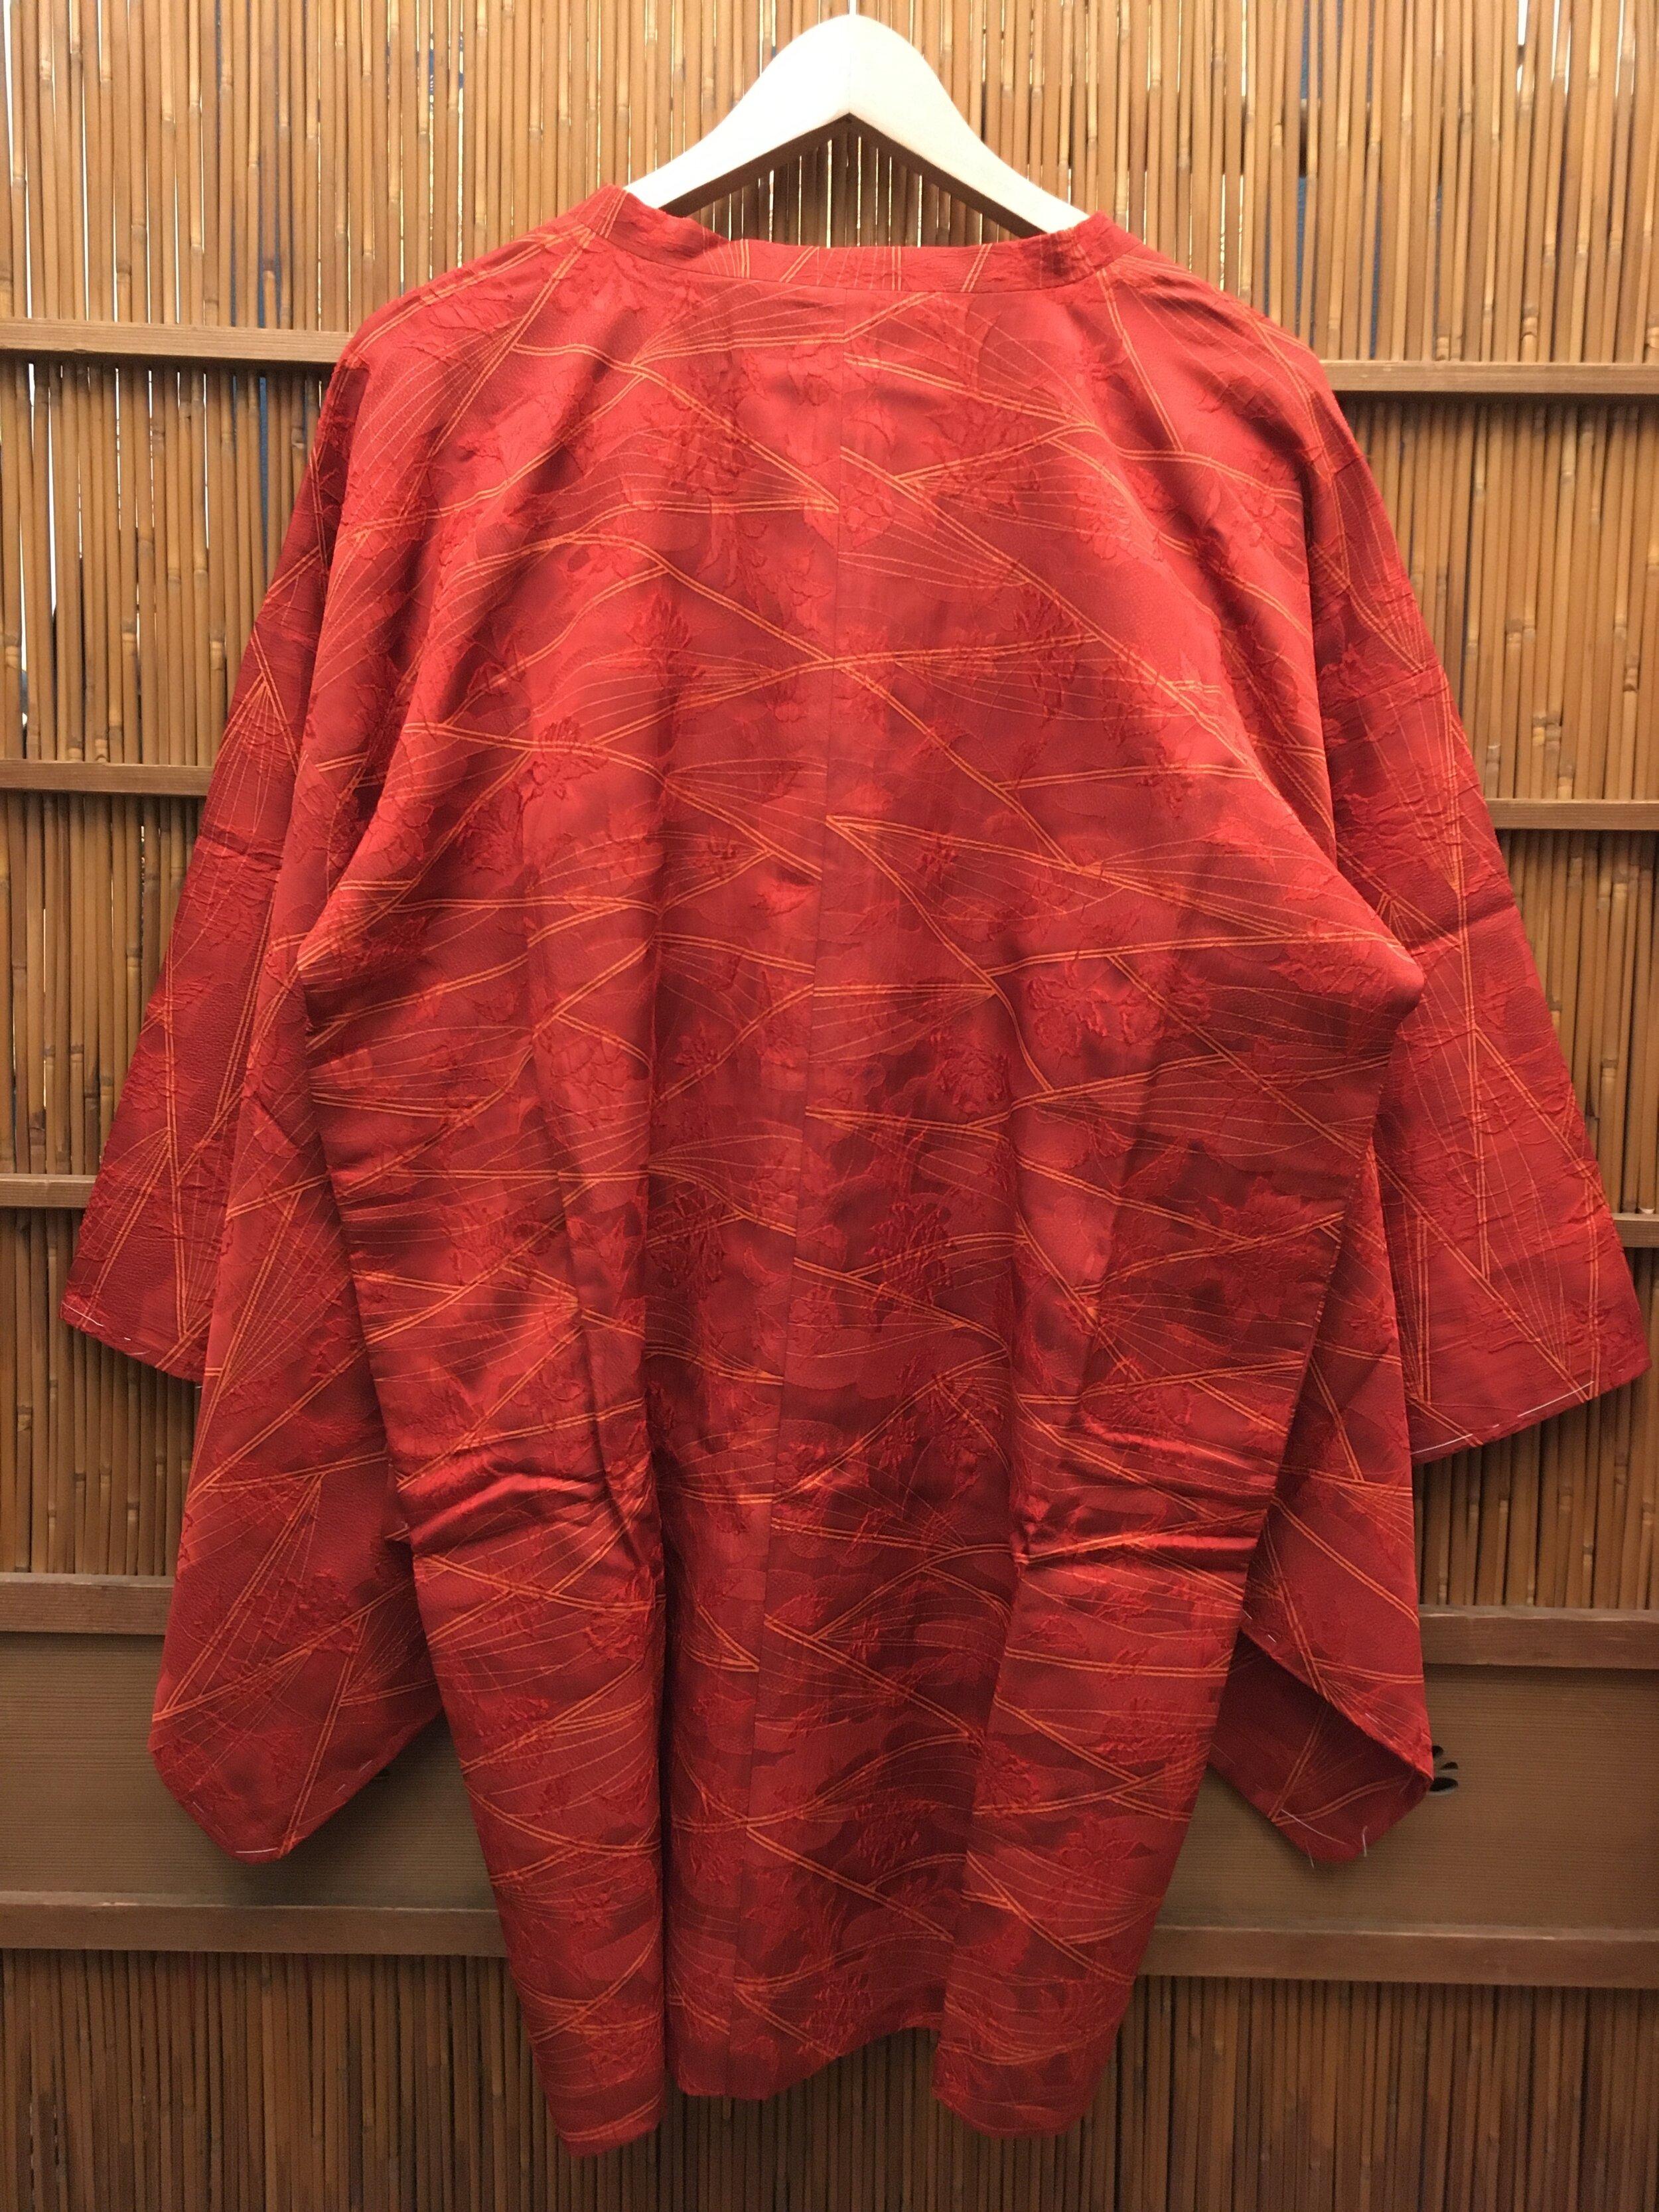 This is a thin coat which we ware on the Kimono. It is for the spring. 
This kind of coat is called Michiyuki in Japanese.
This coat was made in Japan around 1980s in Showa era.

Dimensions:
Total wide : 78 cm
Hight: 68 cm
Sleeve wide : 34 cm
Sleeve